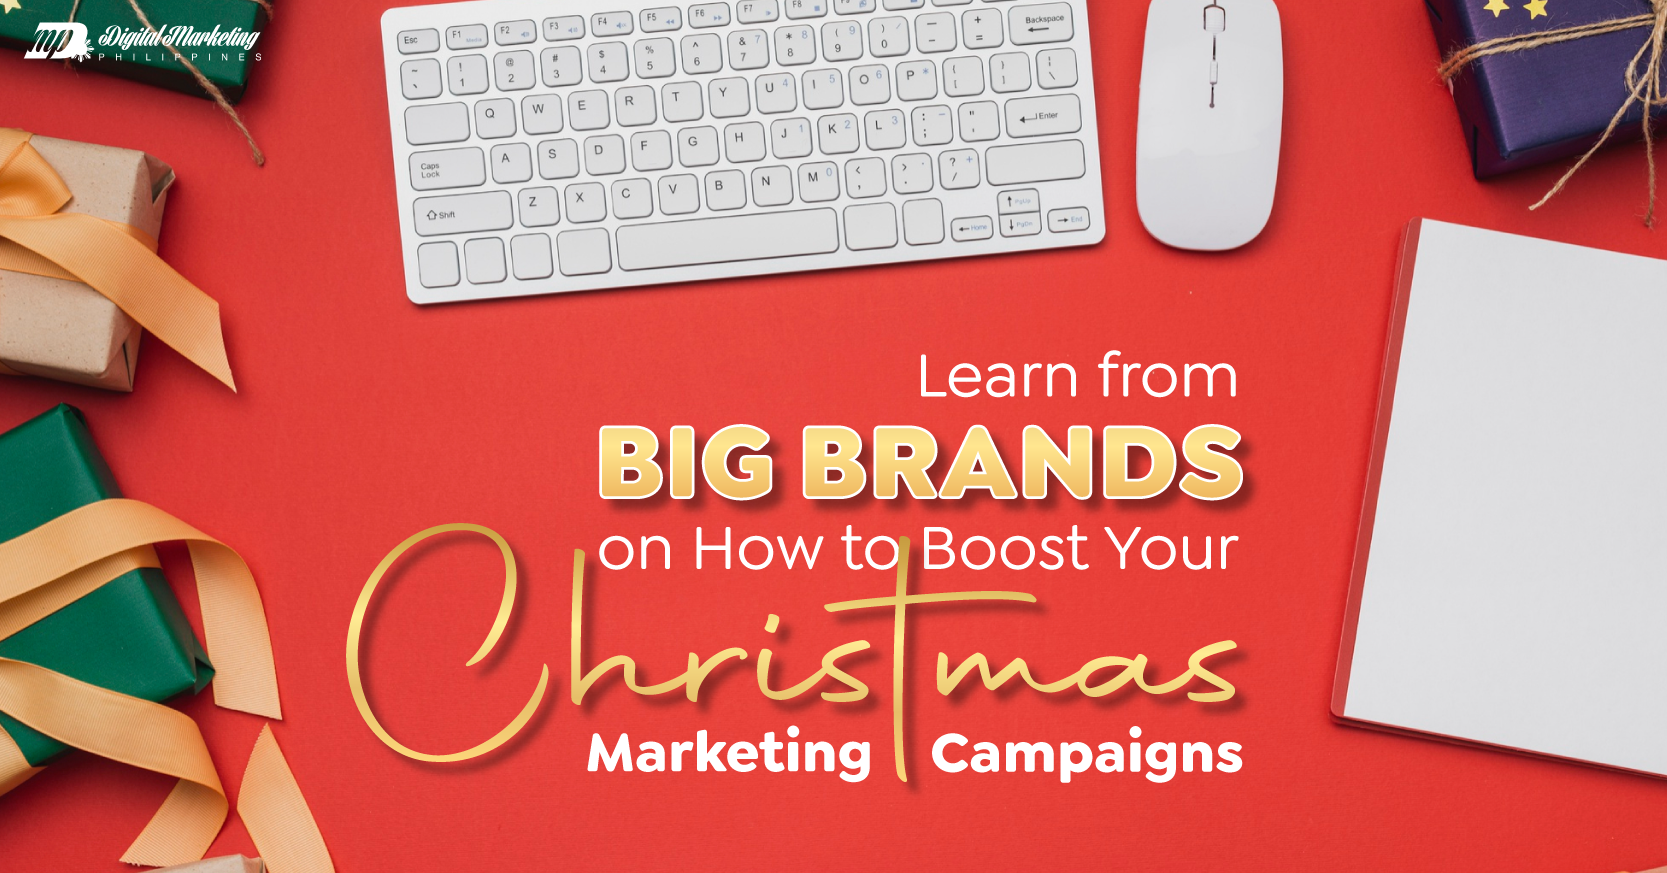 Learn from Big Brands on How to Boost Your Christmas Marketing Campaigns